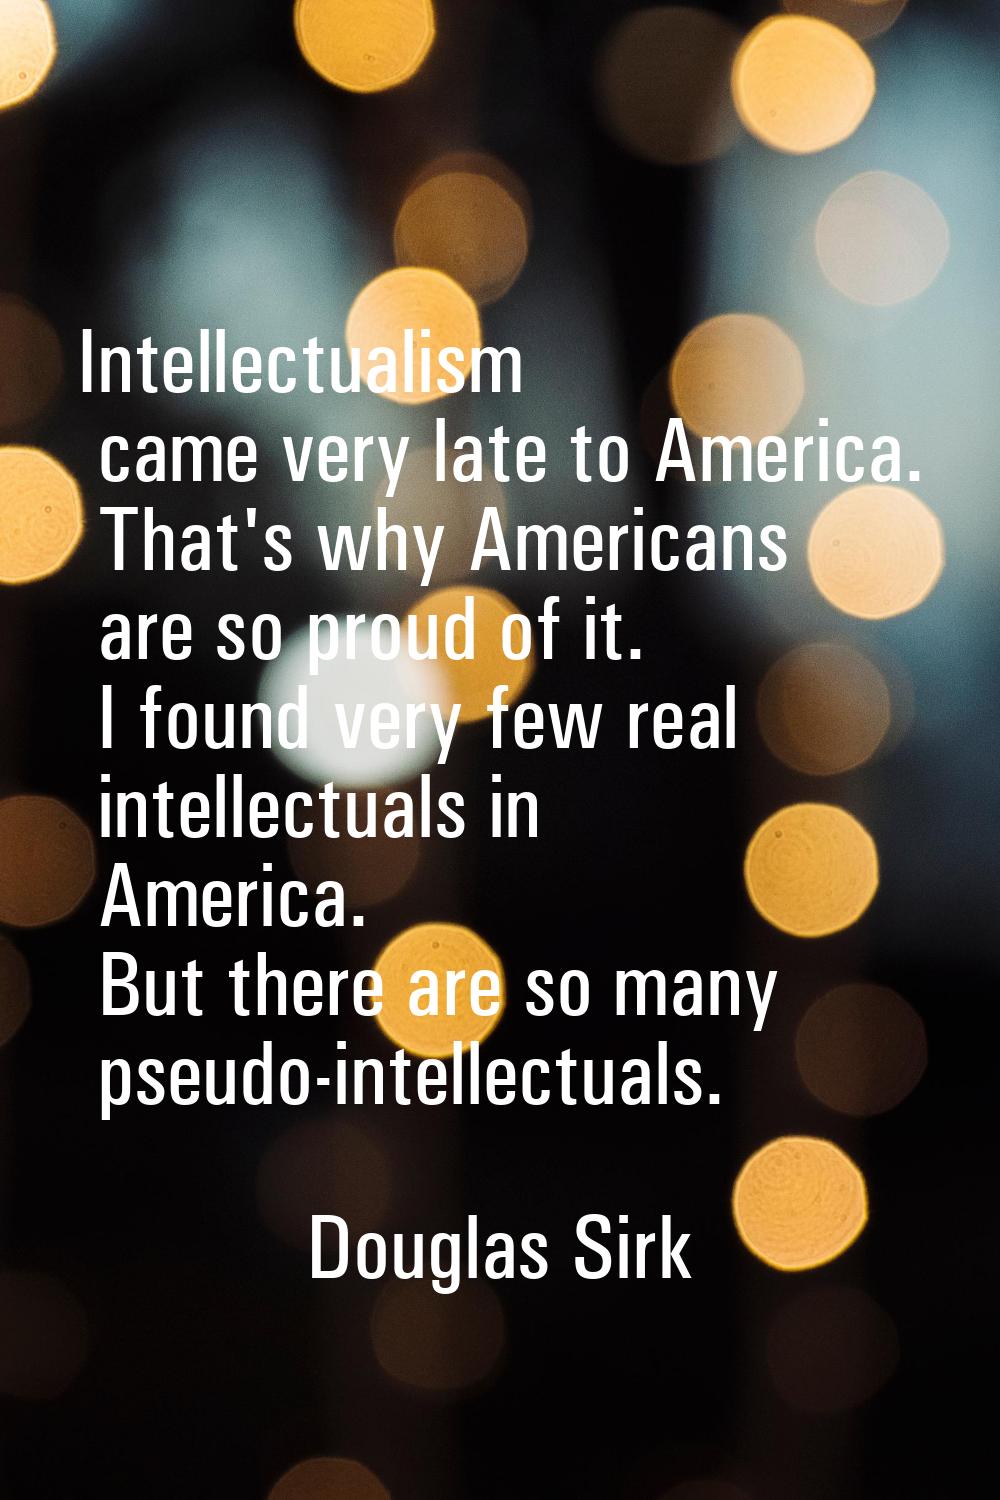 Intellectualism came very late to America. That's why Americans are so proud of it. I found very fe